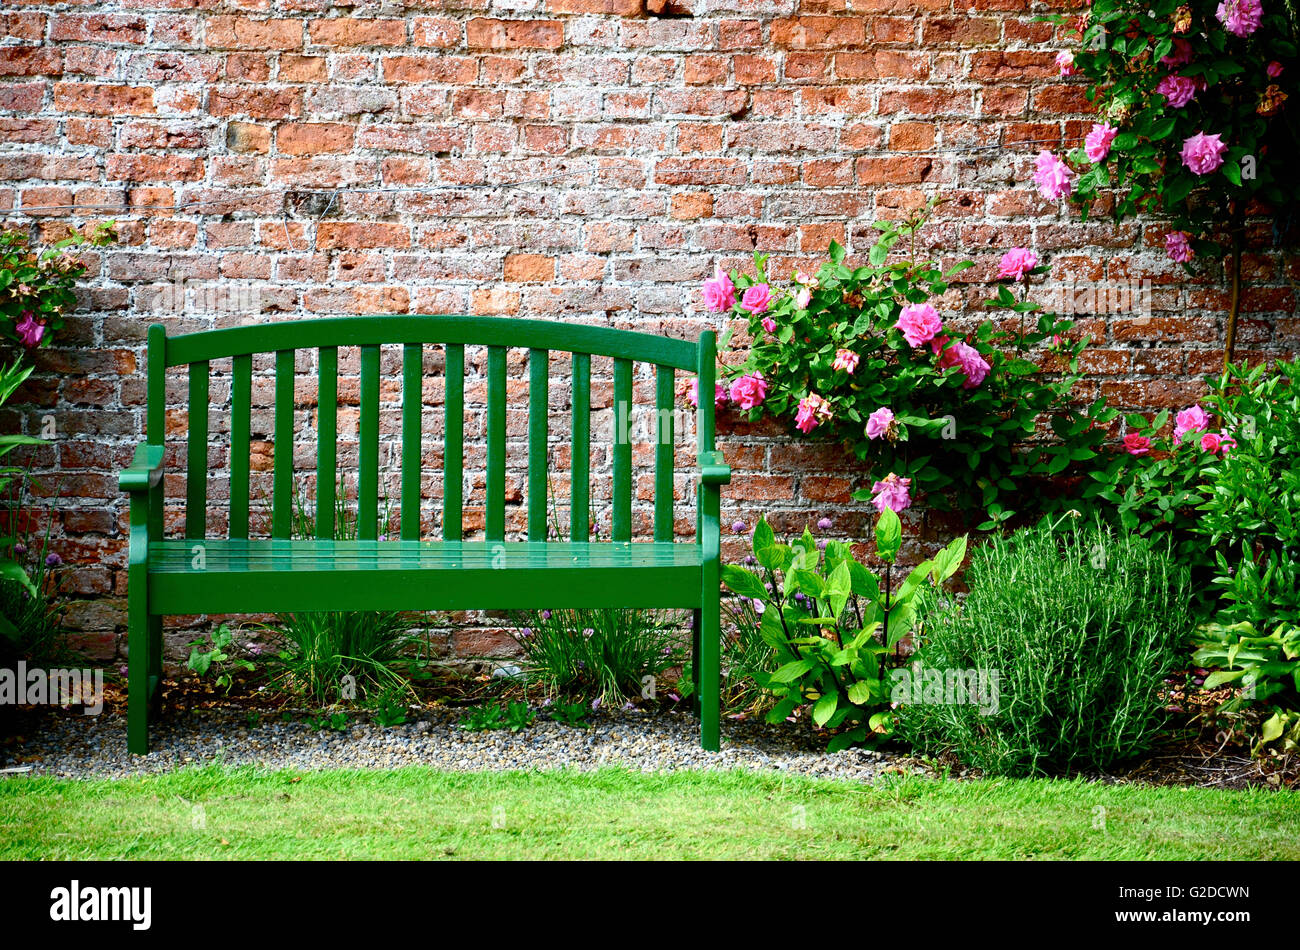 Green Park Bench Against Brick Wall Surrounded by Pink Roses and Plants Stock Photo